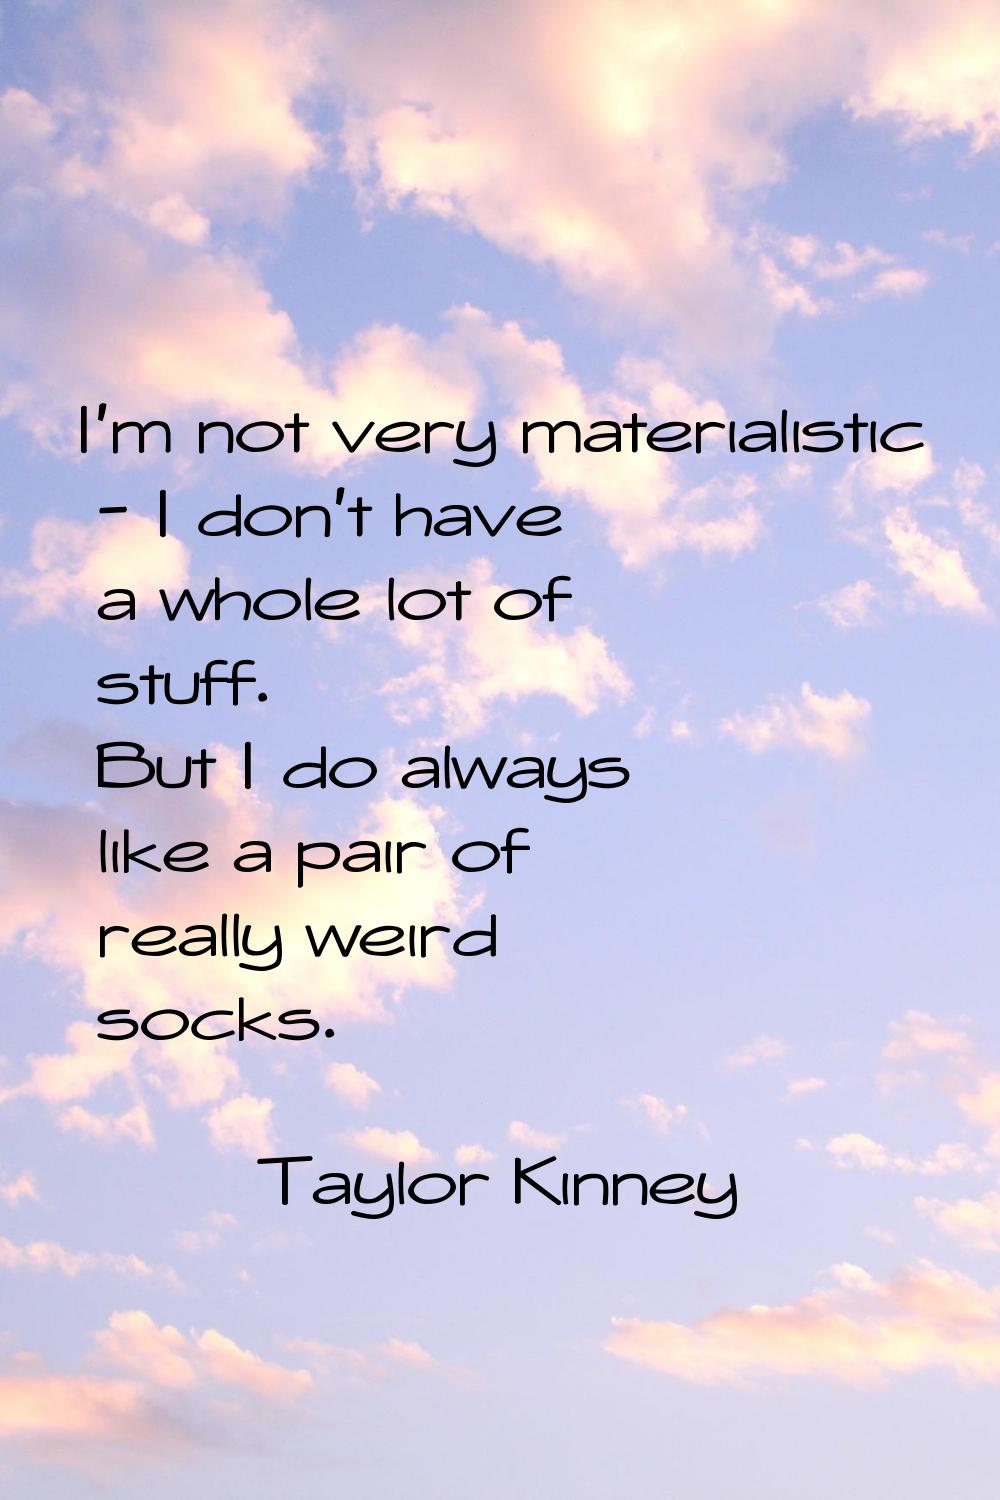 I'm not very materialistic - I don't have a whole lot of stuff. But I do always like a pair of real